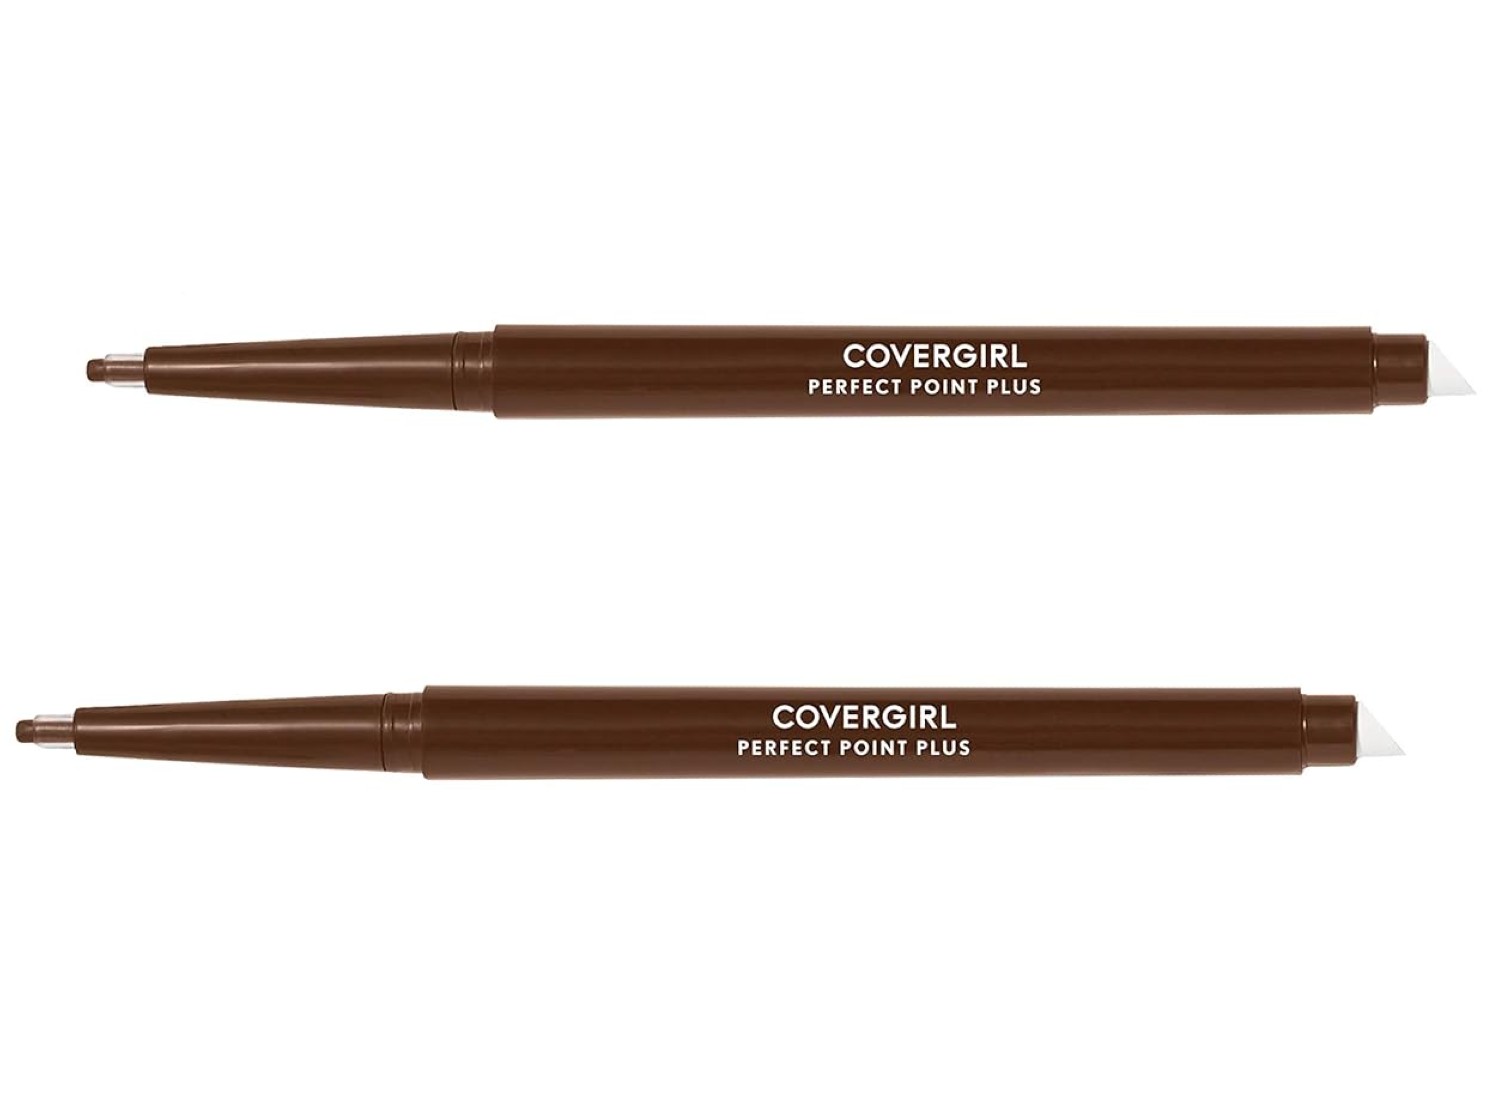 Covergirl Perfect Point Plus Eyeliner Pencil